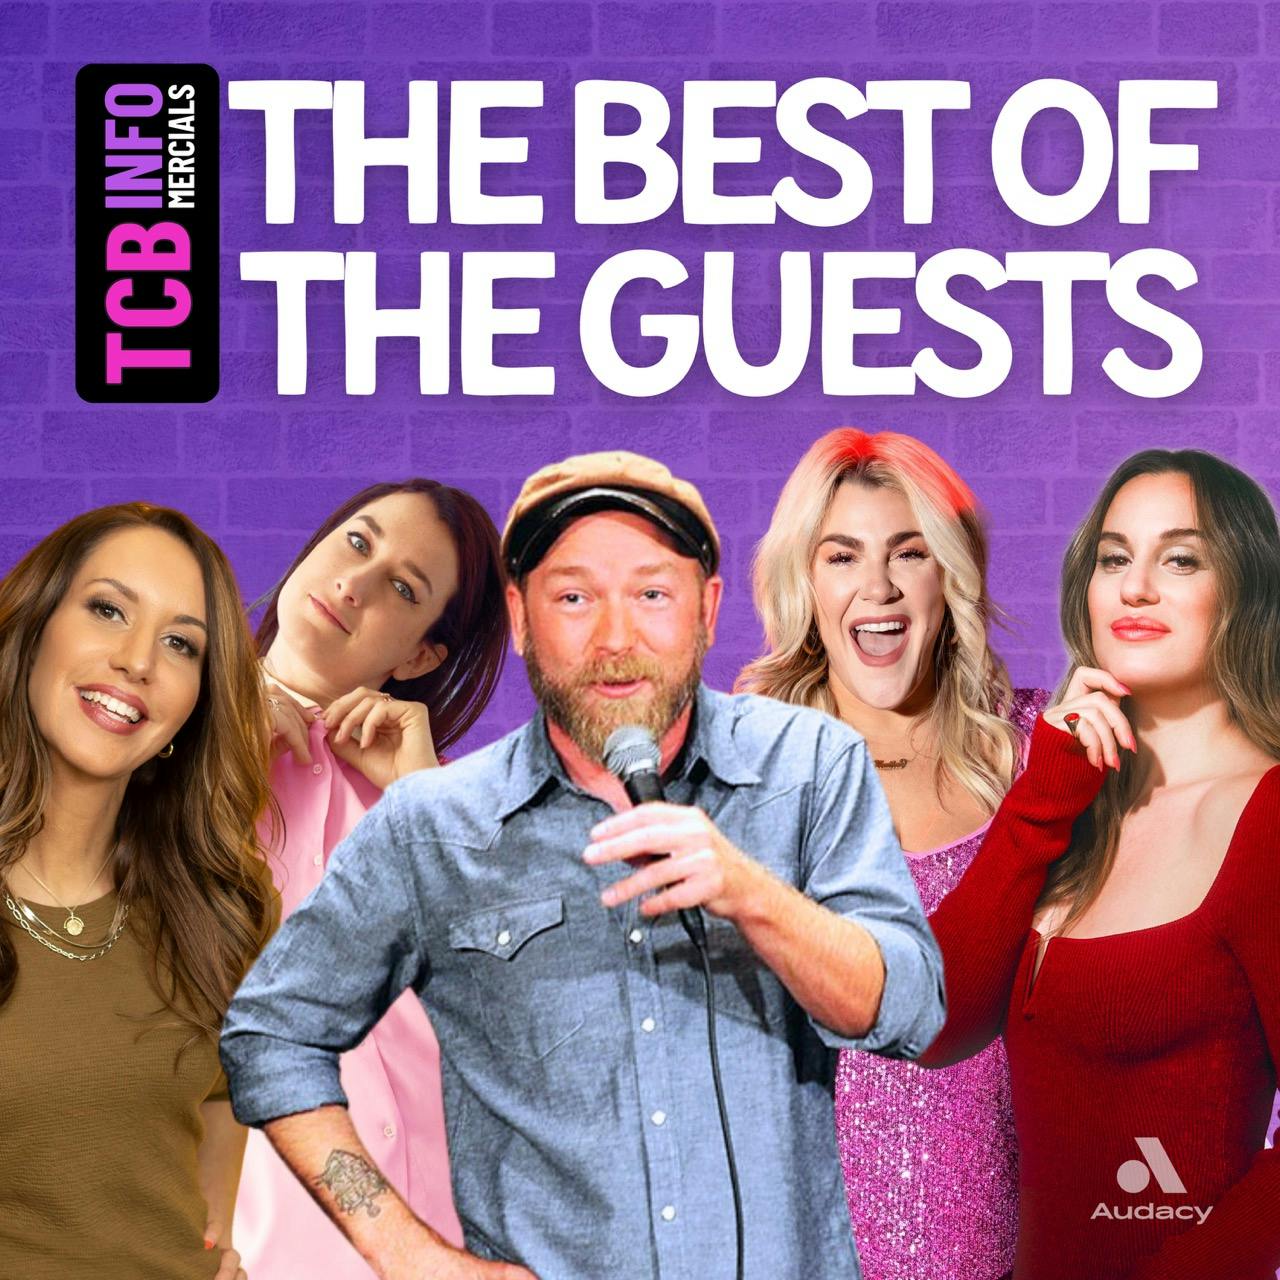 The Best Of The Guests!